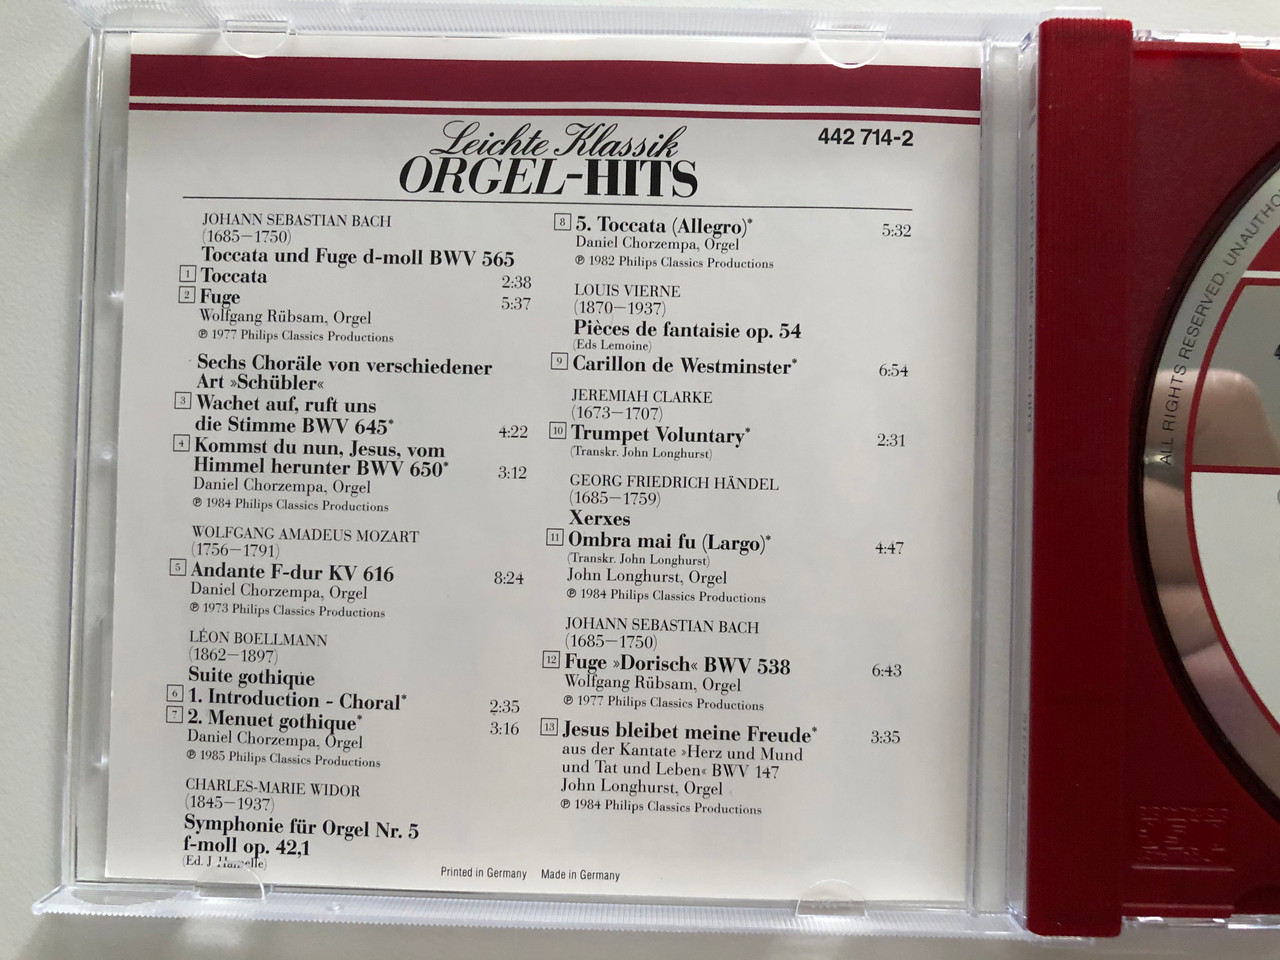 Leichte Klassik - Orgel-Hits / Philips Classics Productions Audio CD Stereo  / 442 714-2 - Bible in My Language